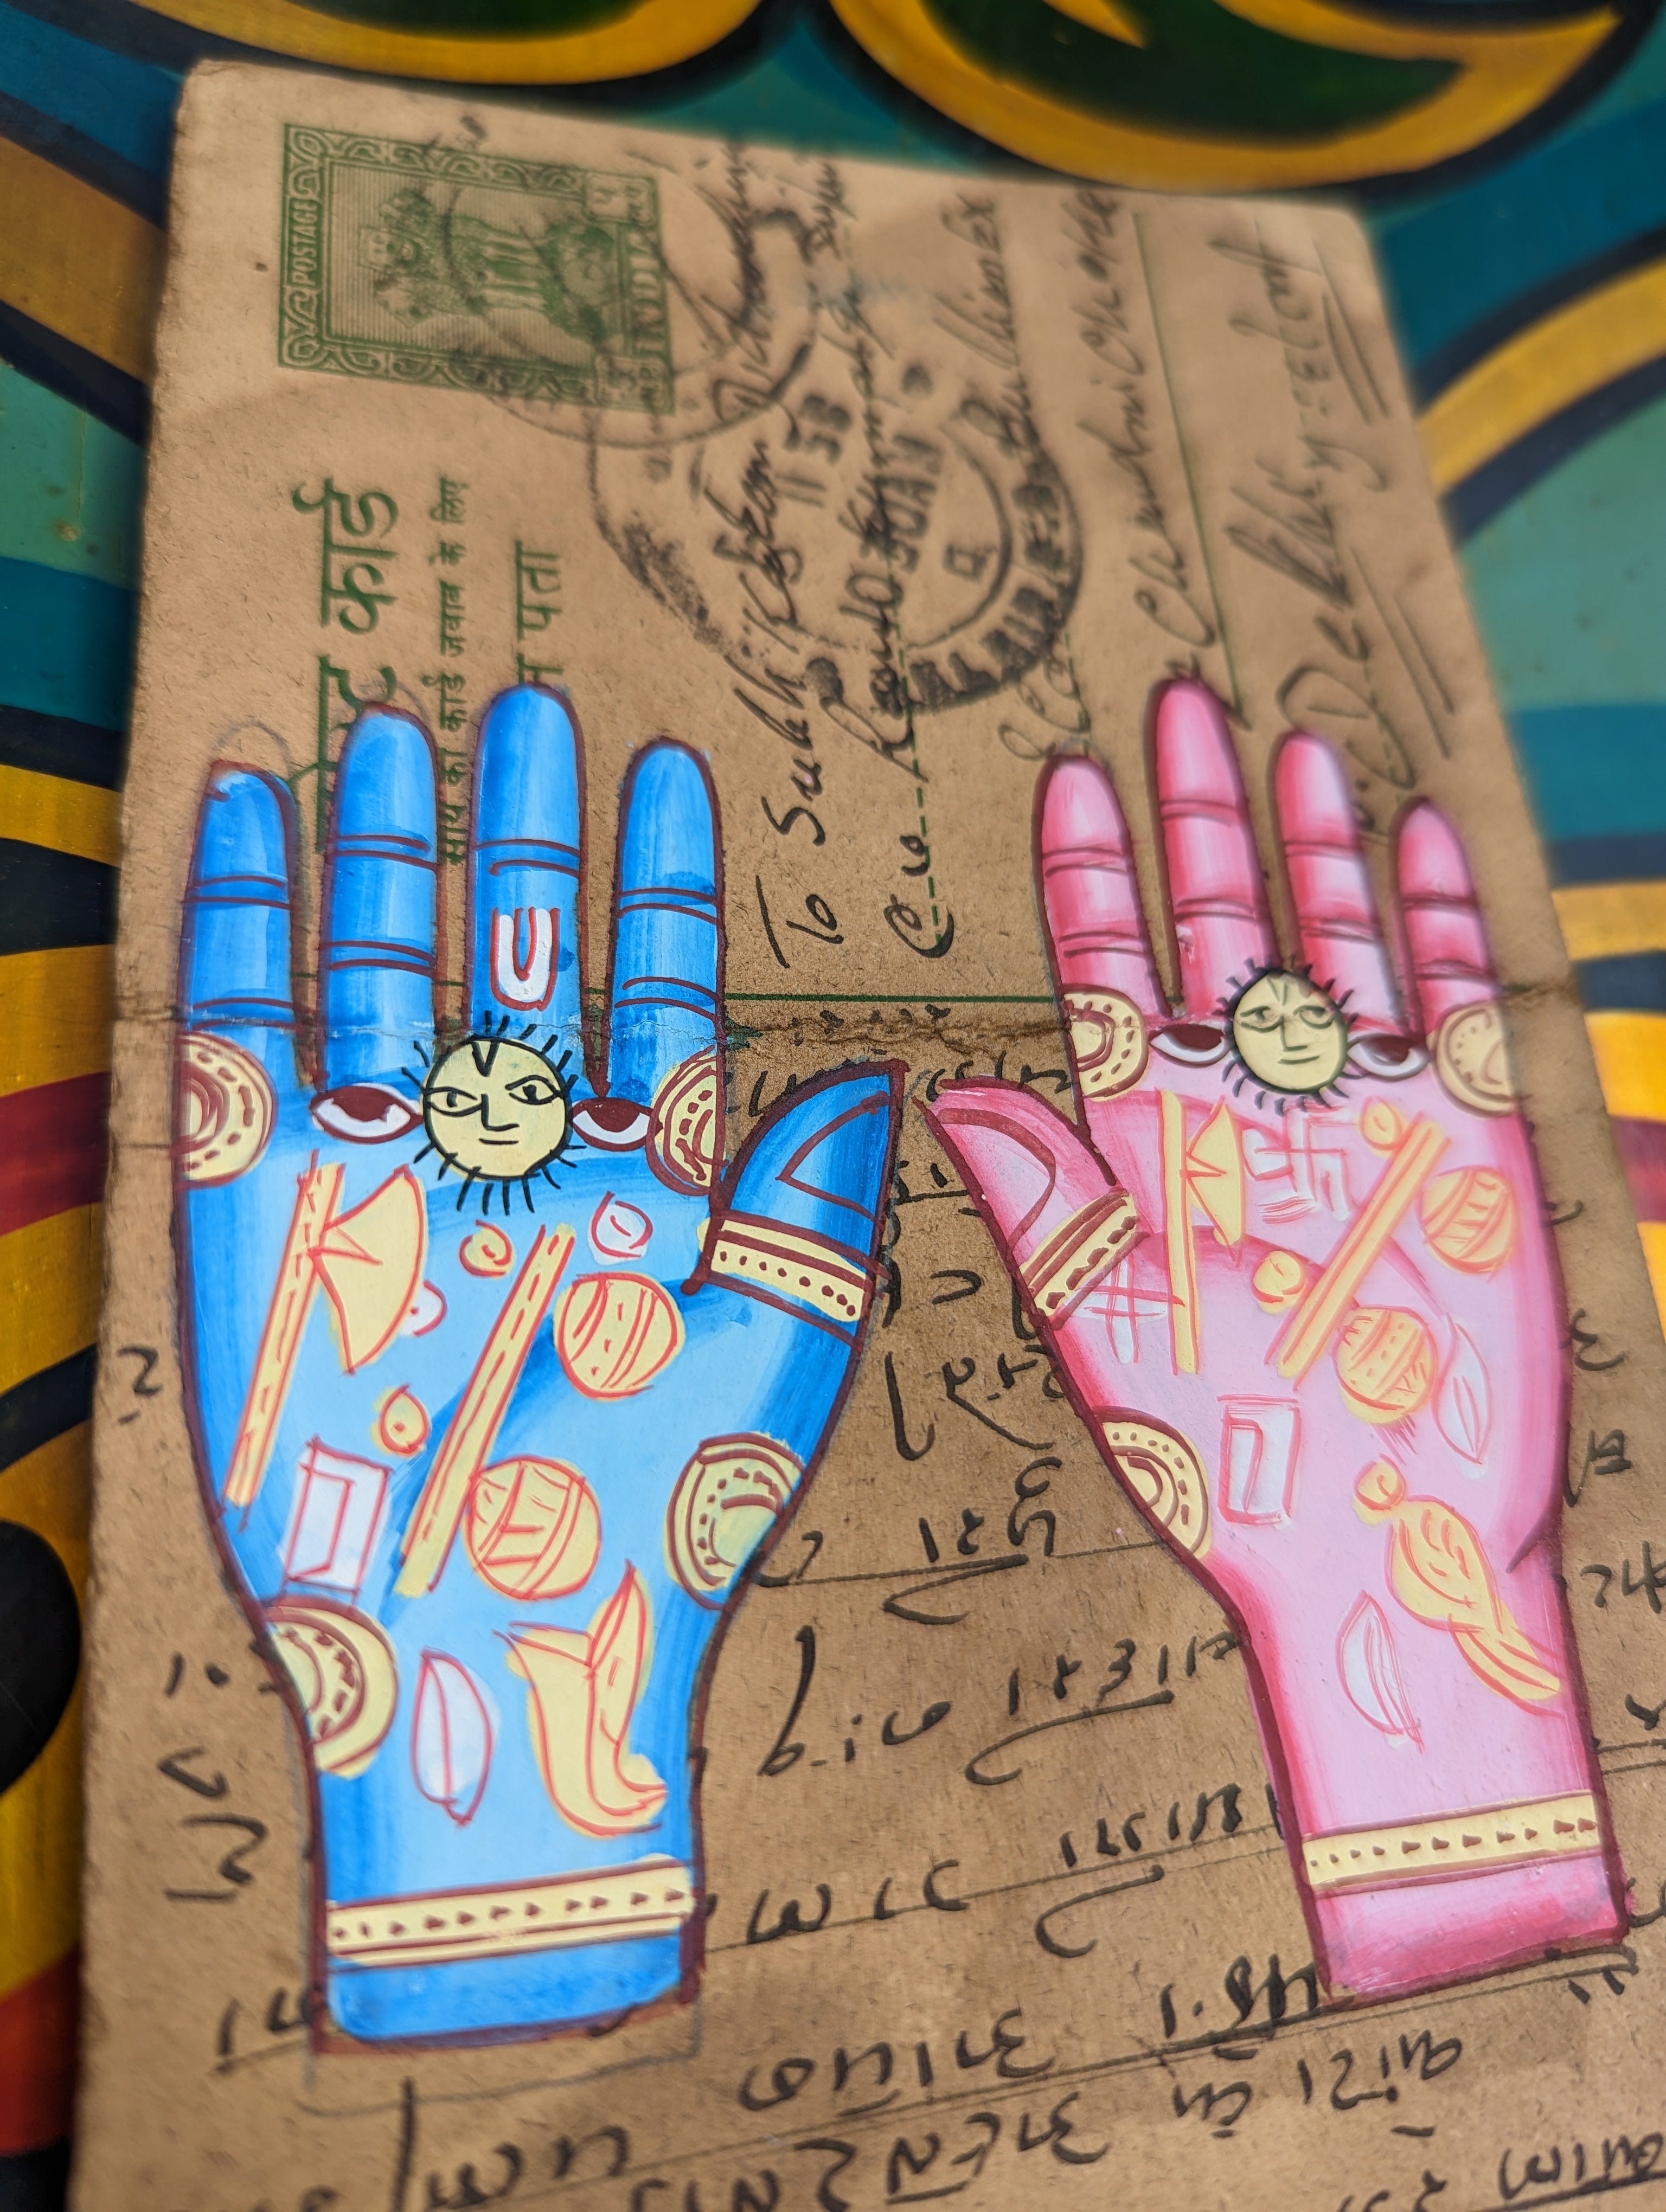 Hand painted indian postcards - hands and feet